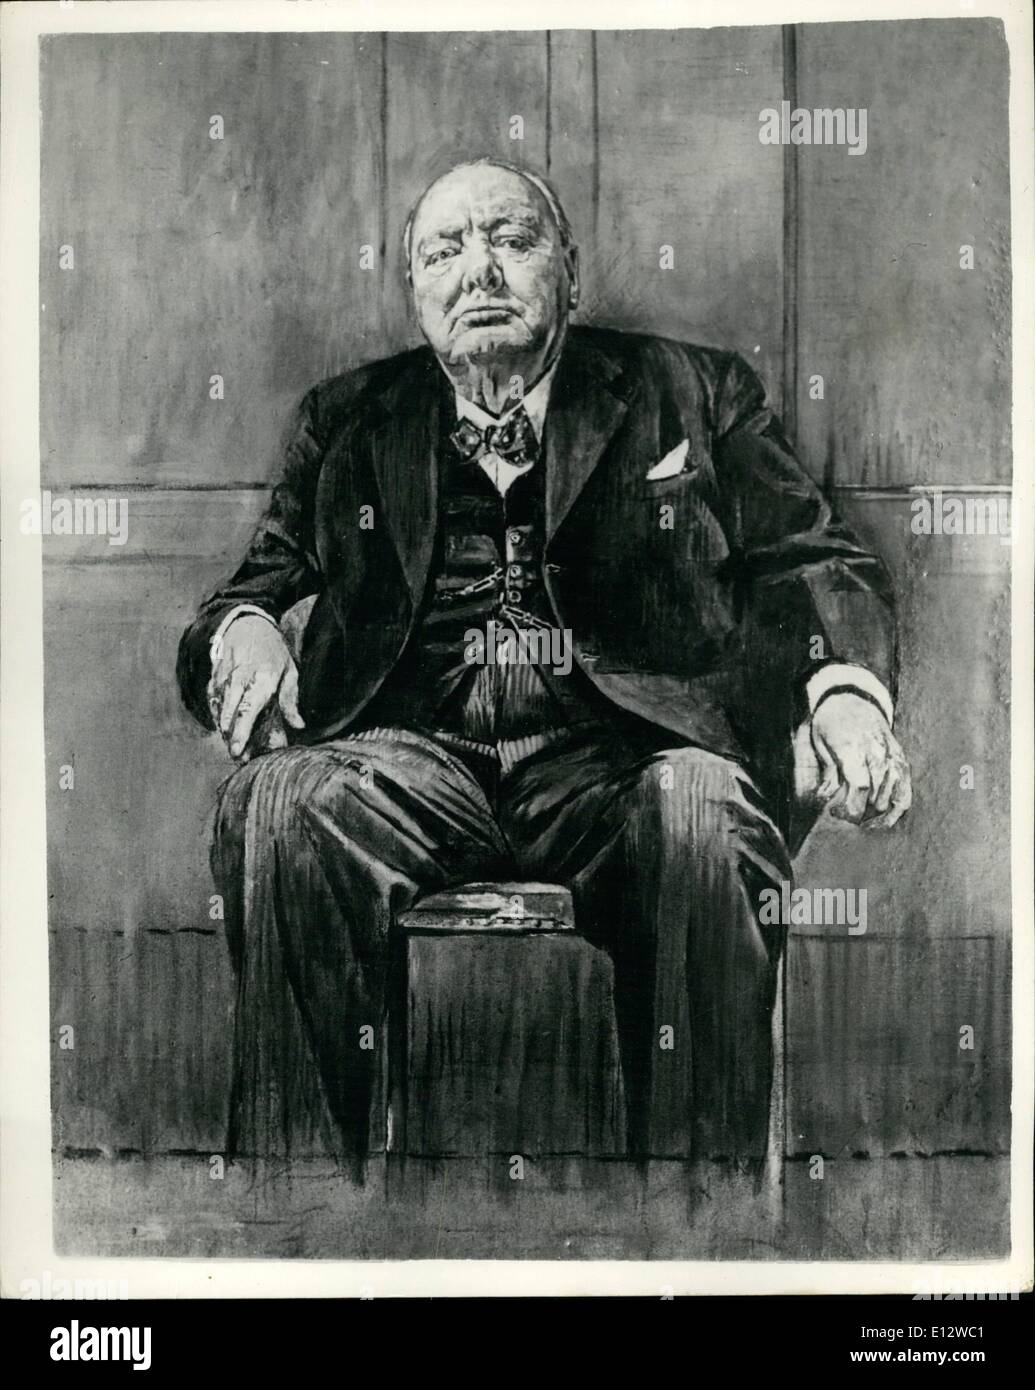 Feb. 26, 2012 - The Portrait painted by Mr. Graham Sutherland presented to Sir Winston Churchill on his 80th Birthday by past and present members of the houses of lords and commons. Stock Photo